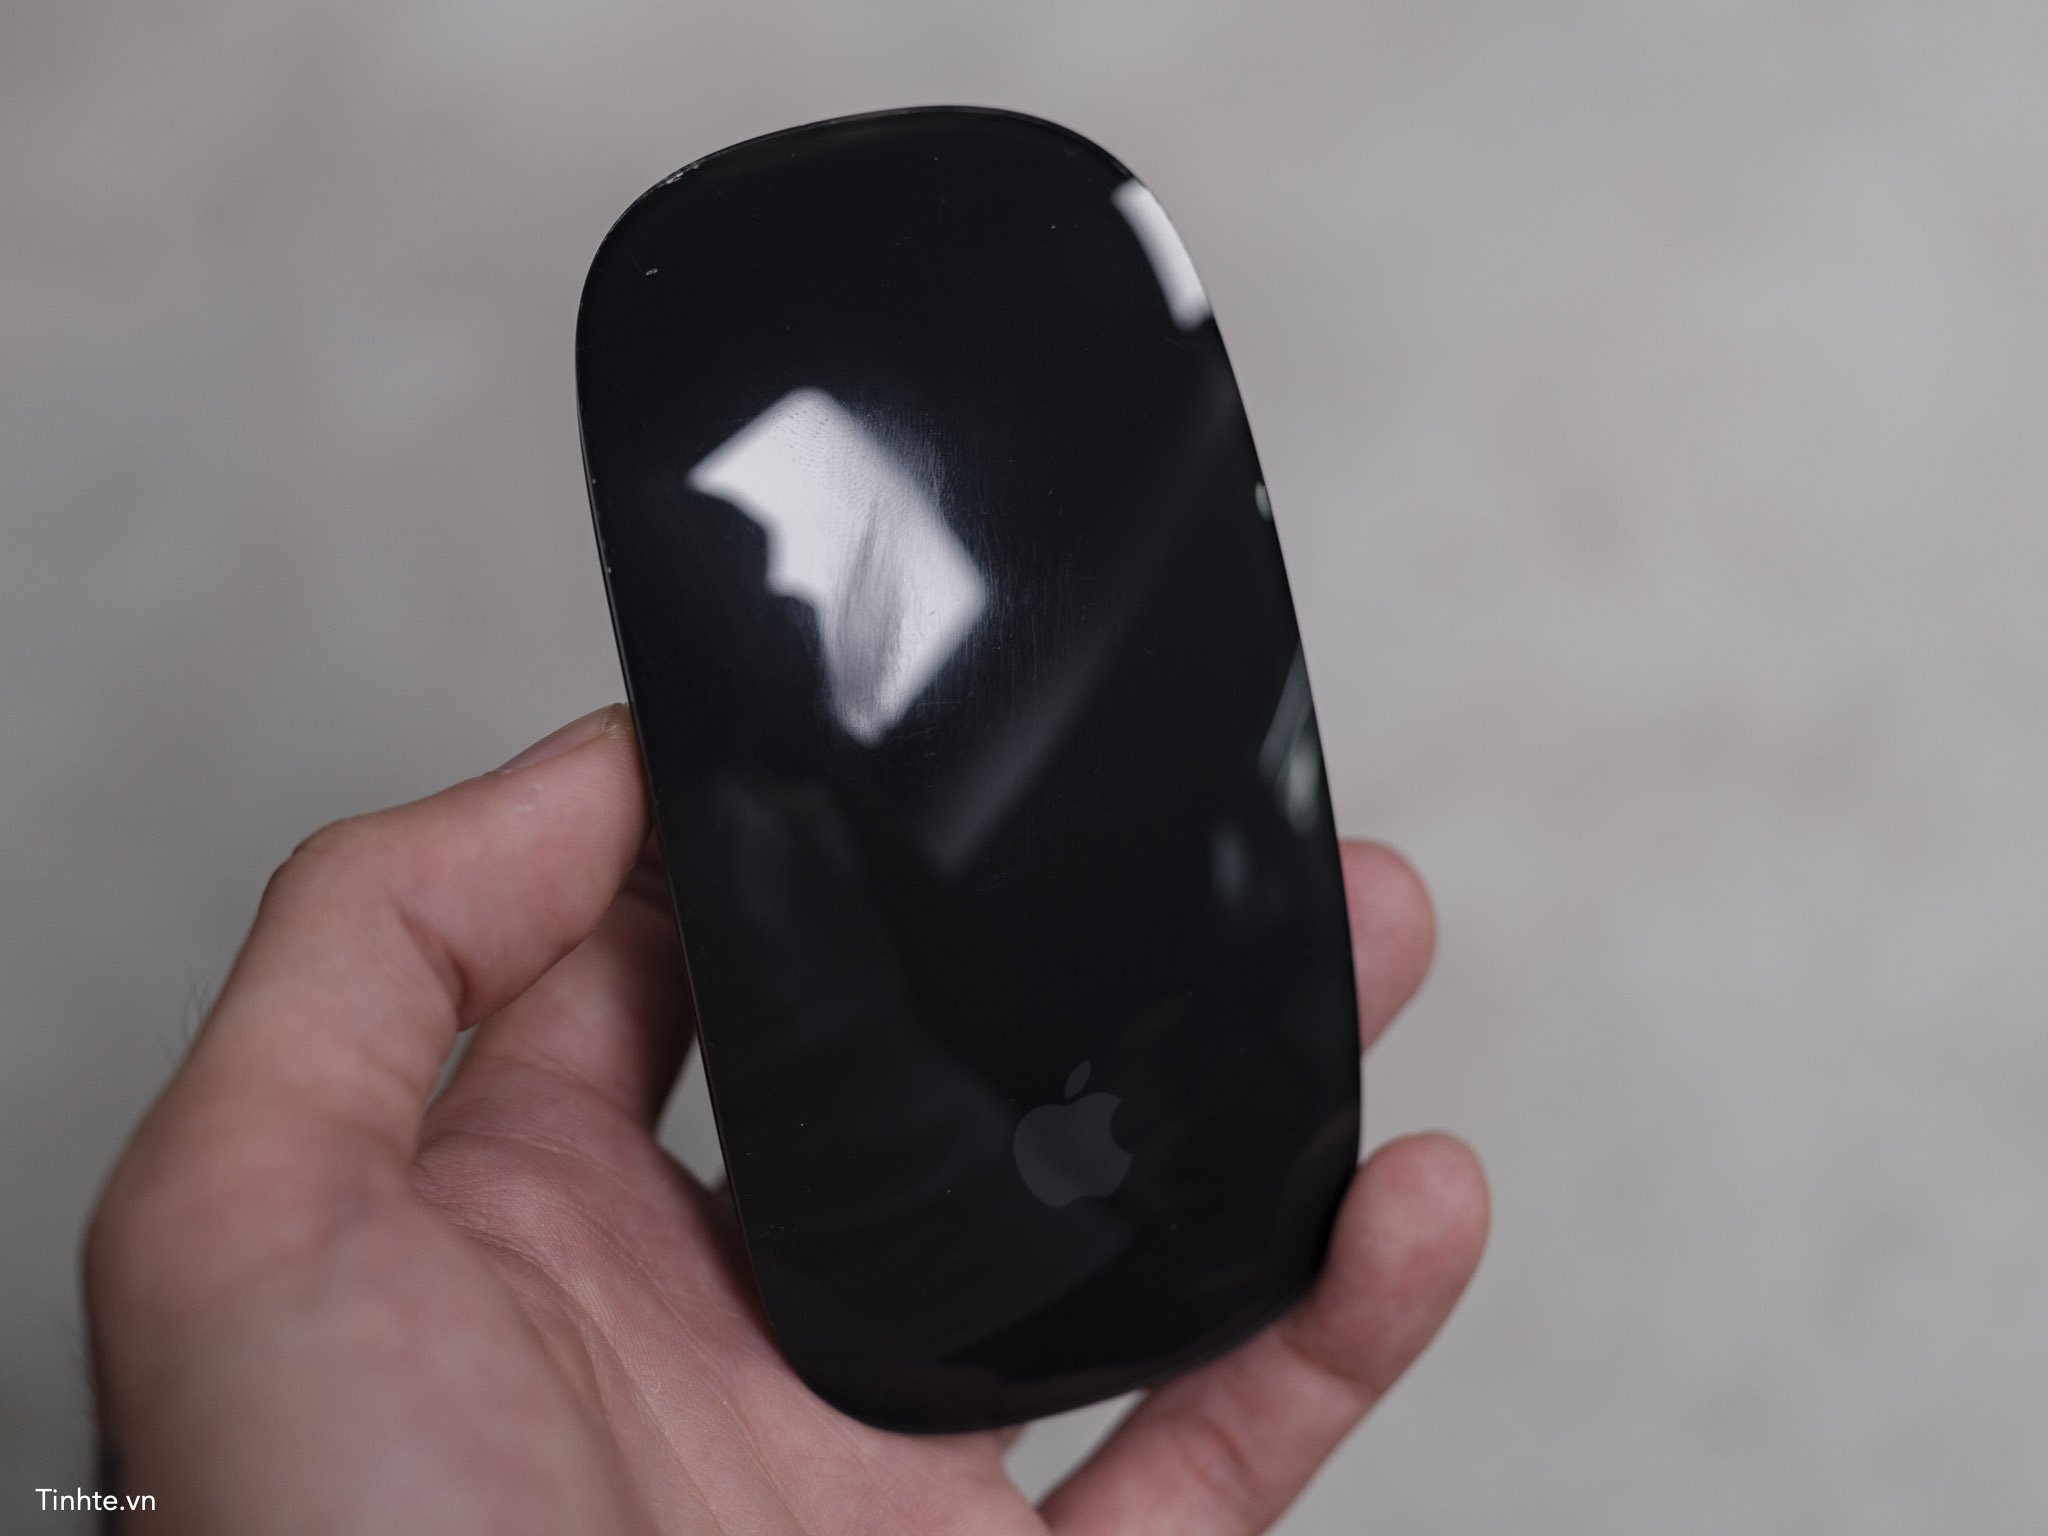 Apple_Magic_mouse_review-02.jpg